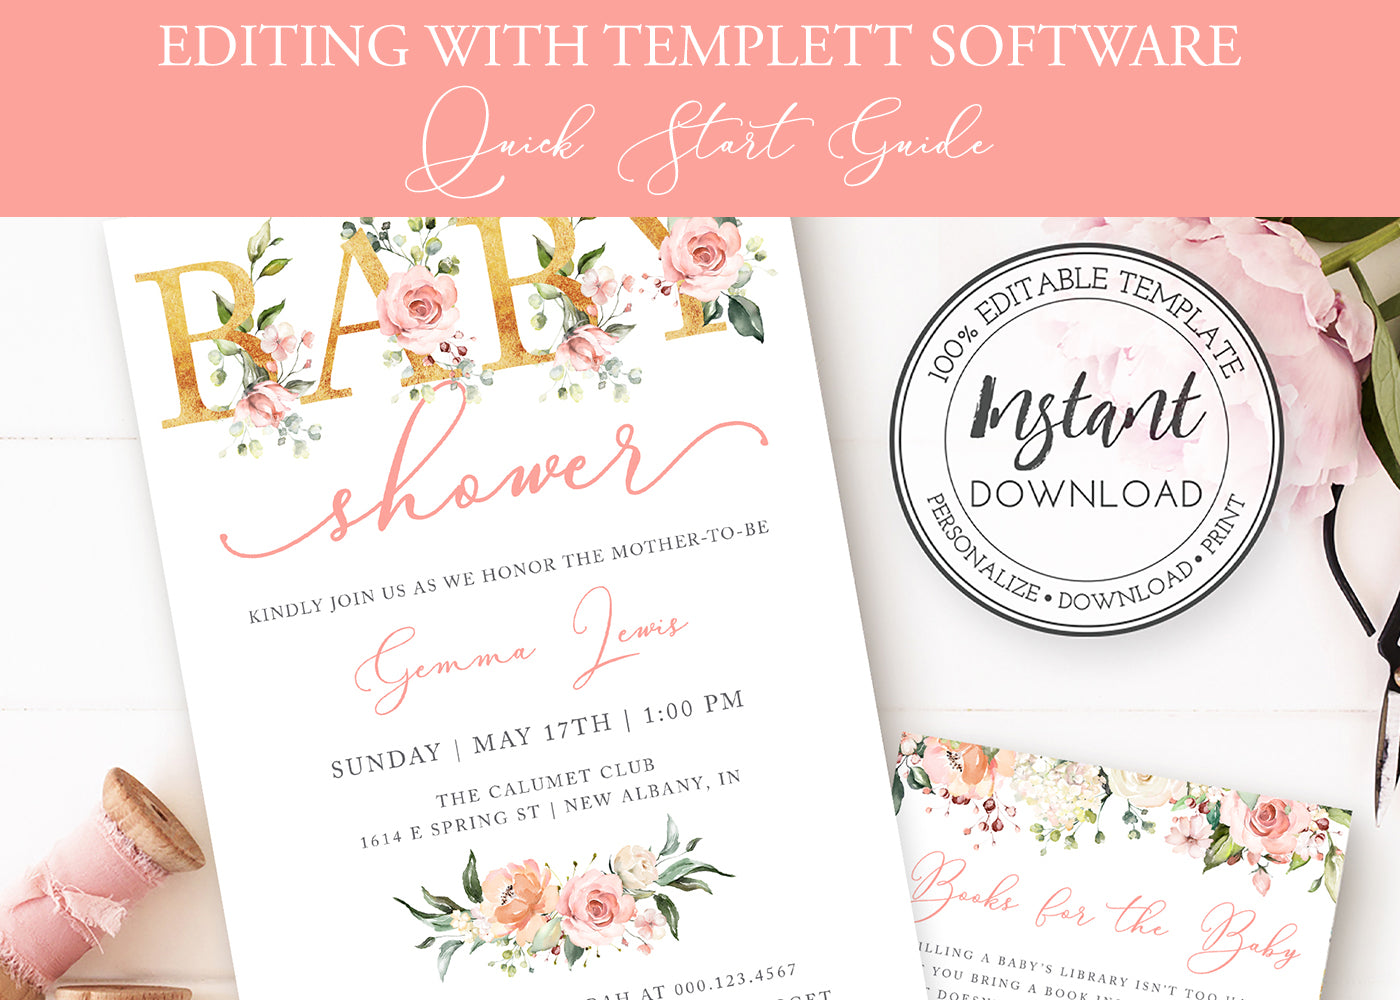 Quick Start Guide to Editing Templates, example is a baby shower invitation with pink flowers and gold and pink text